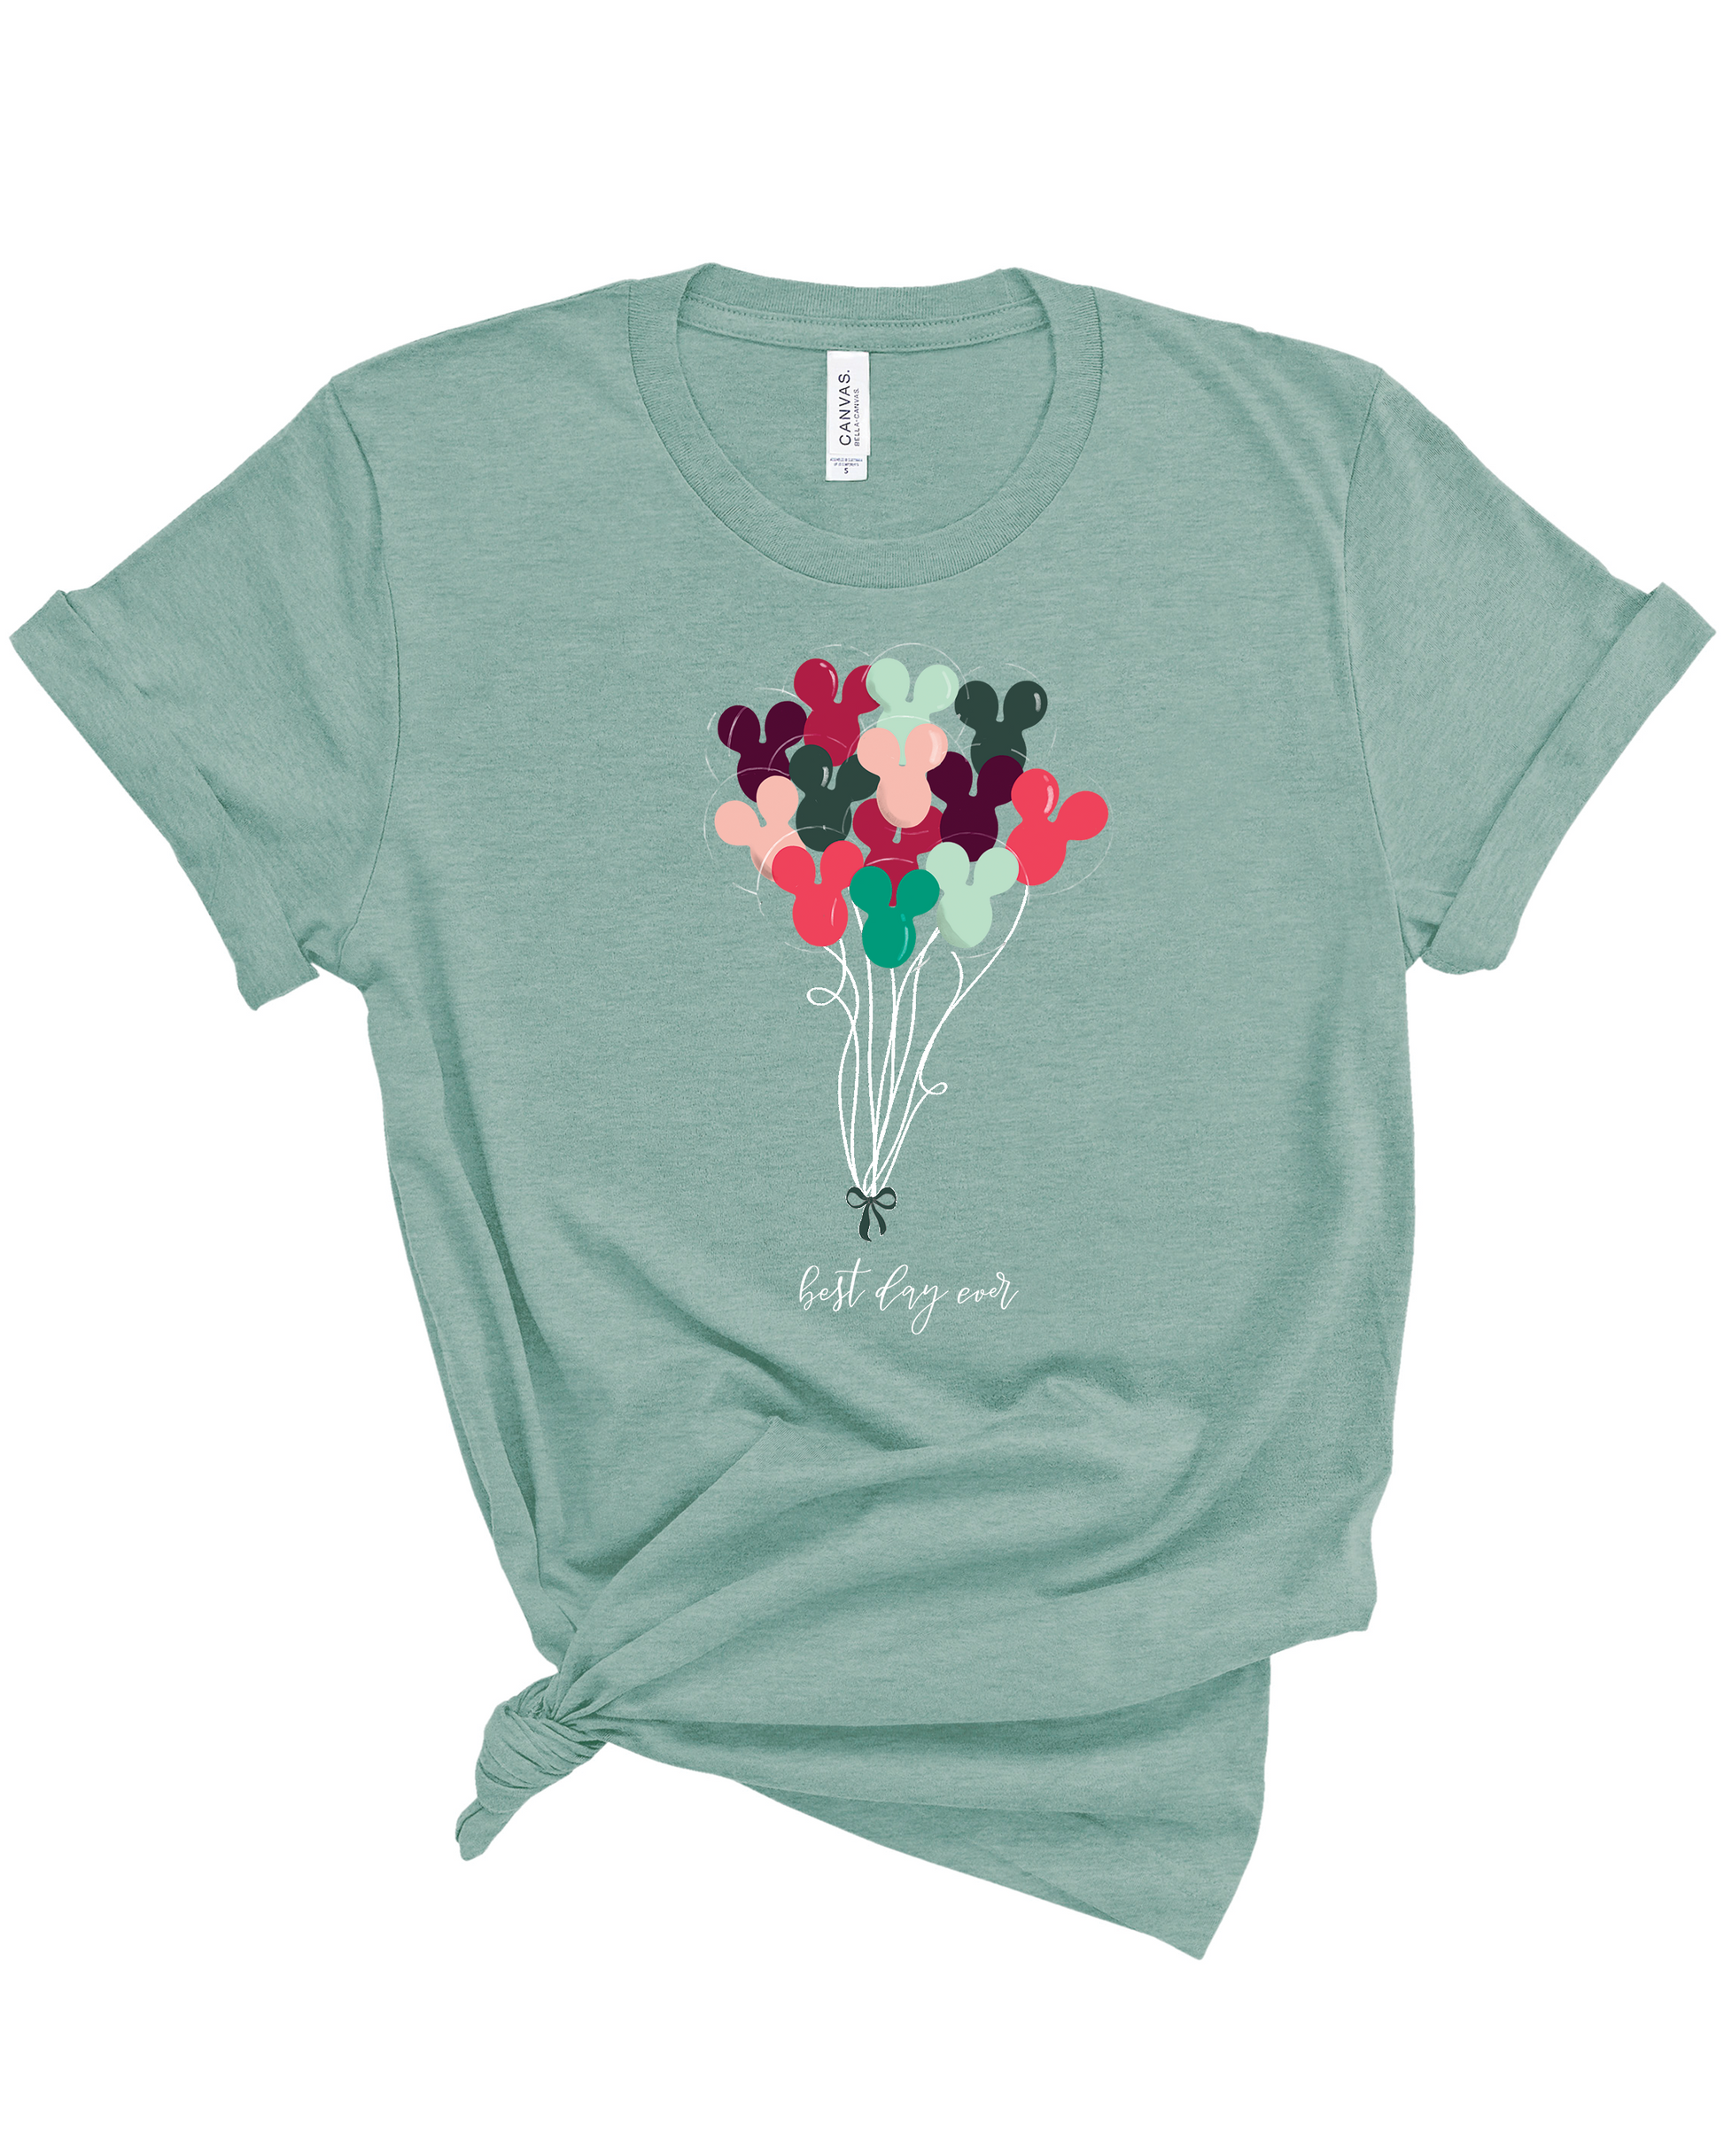 Best Day Ever Balloon | Tee | Adult-Sister Shirts-Sister Shirts, Cute & Custom Tees for Mama & Littles in Trussville, Alabama.